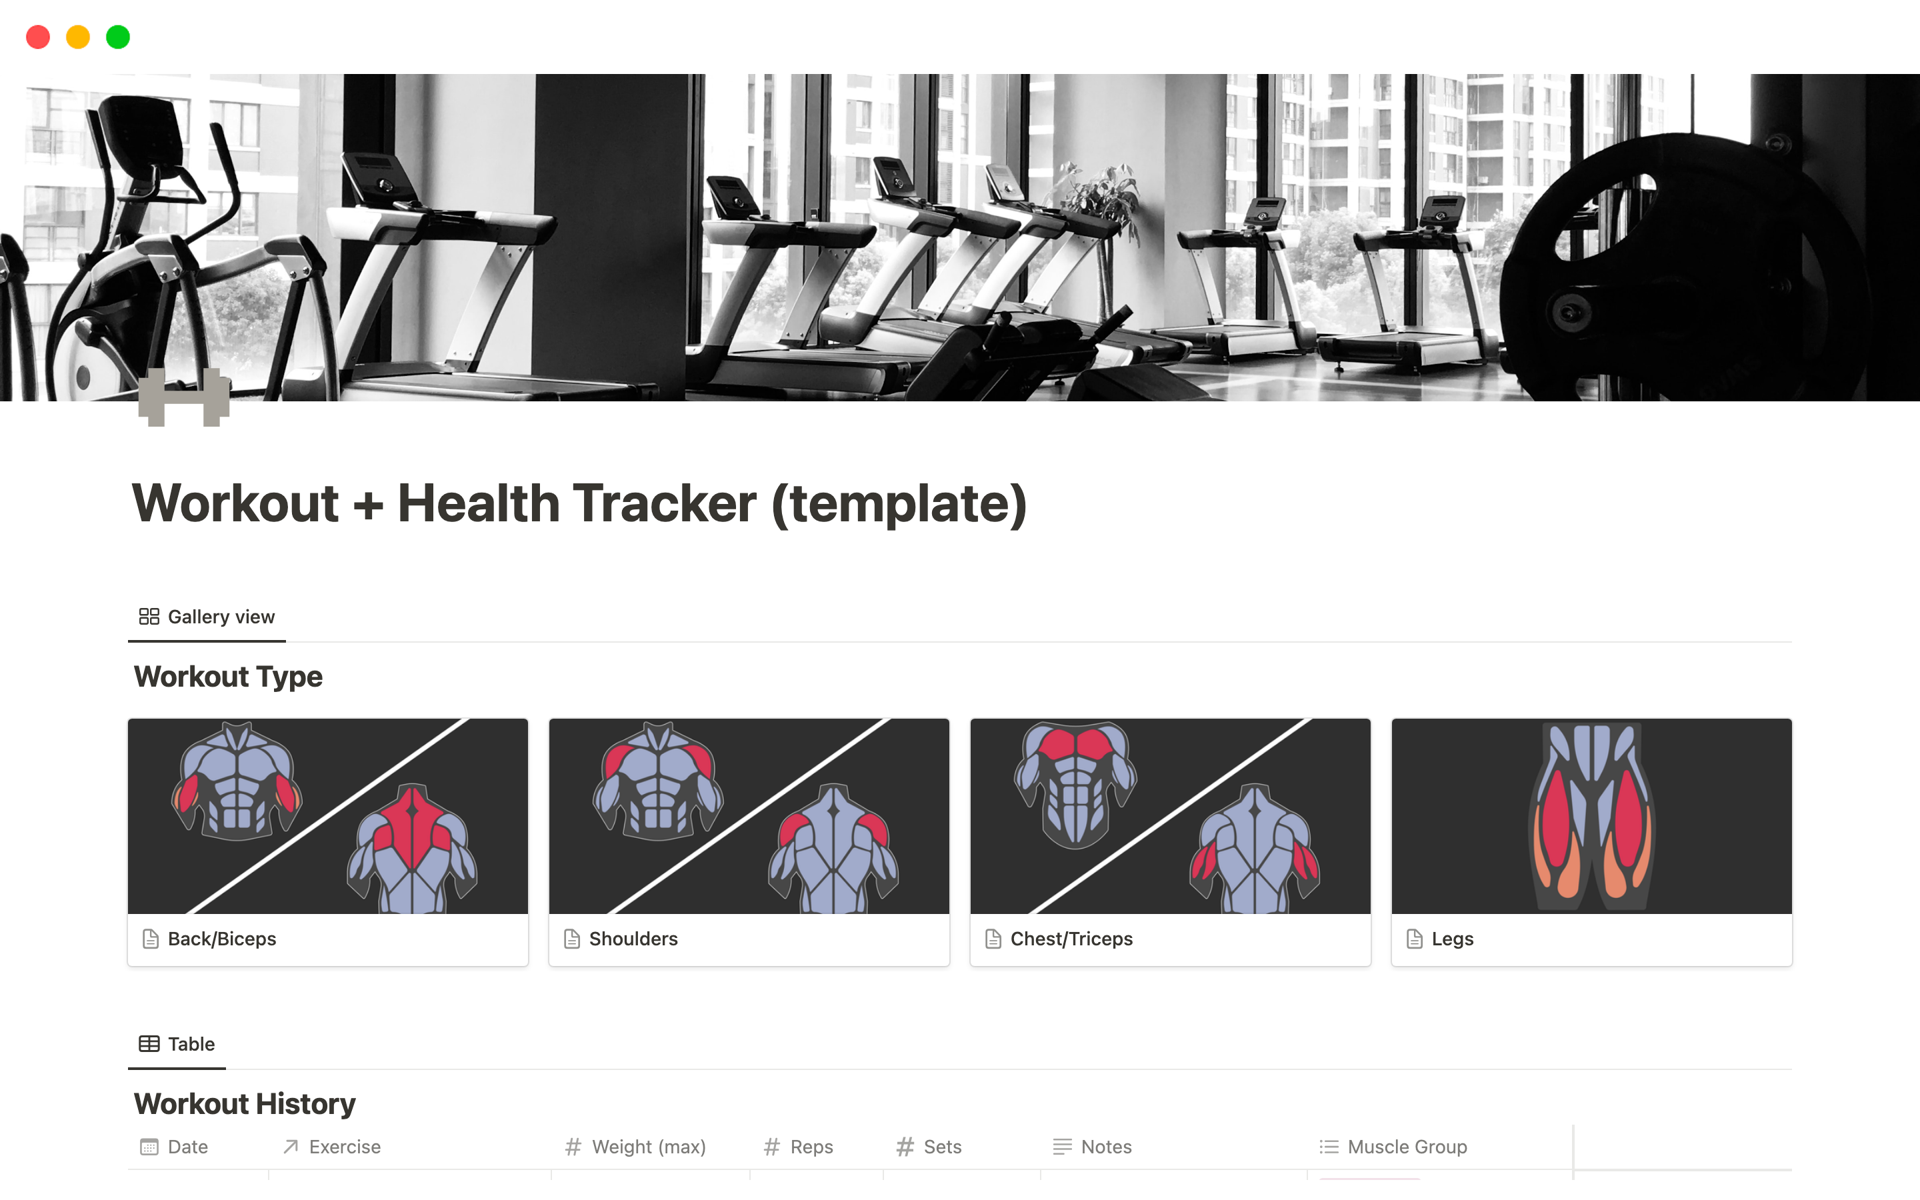 Workout and Health tracker to simplify your exercise logging needs!